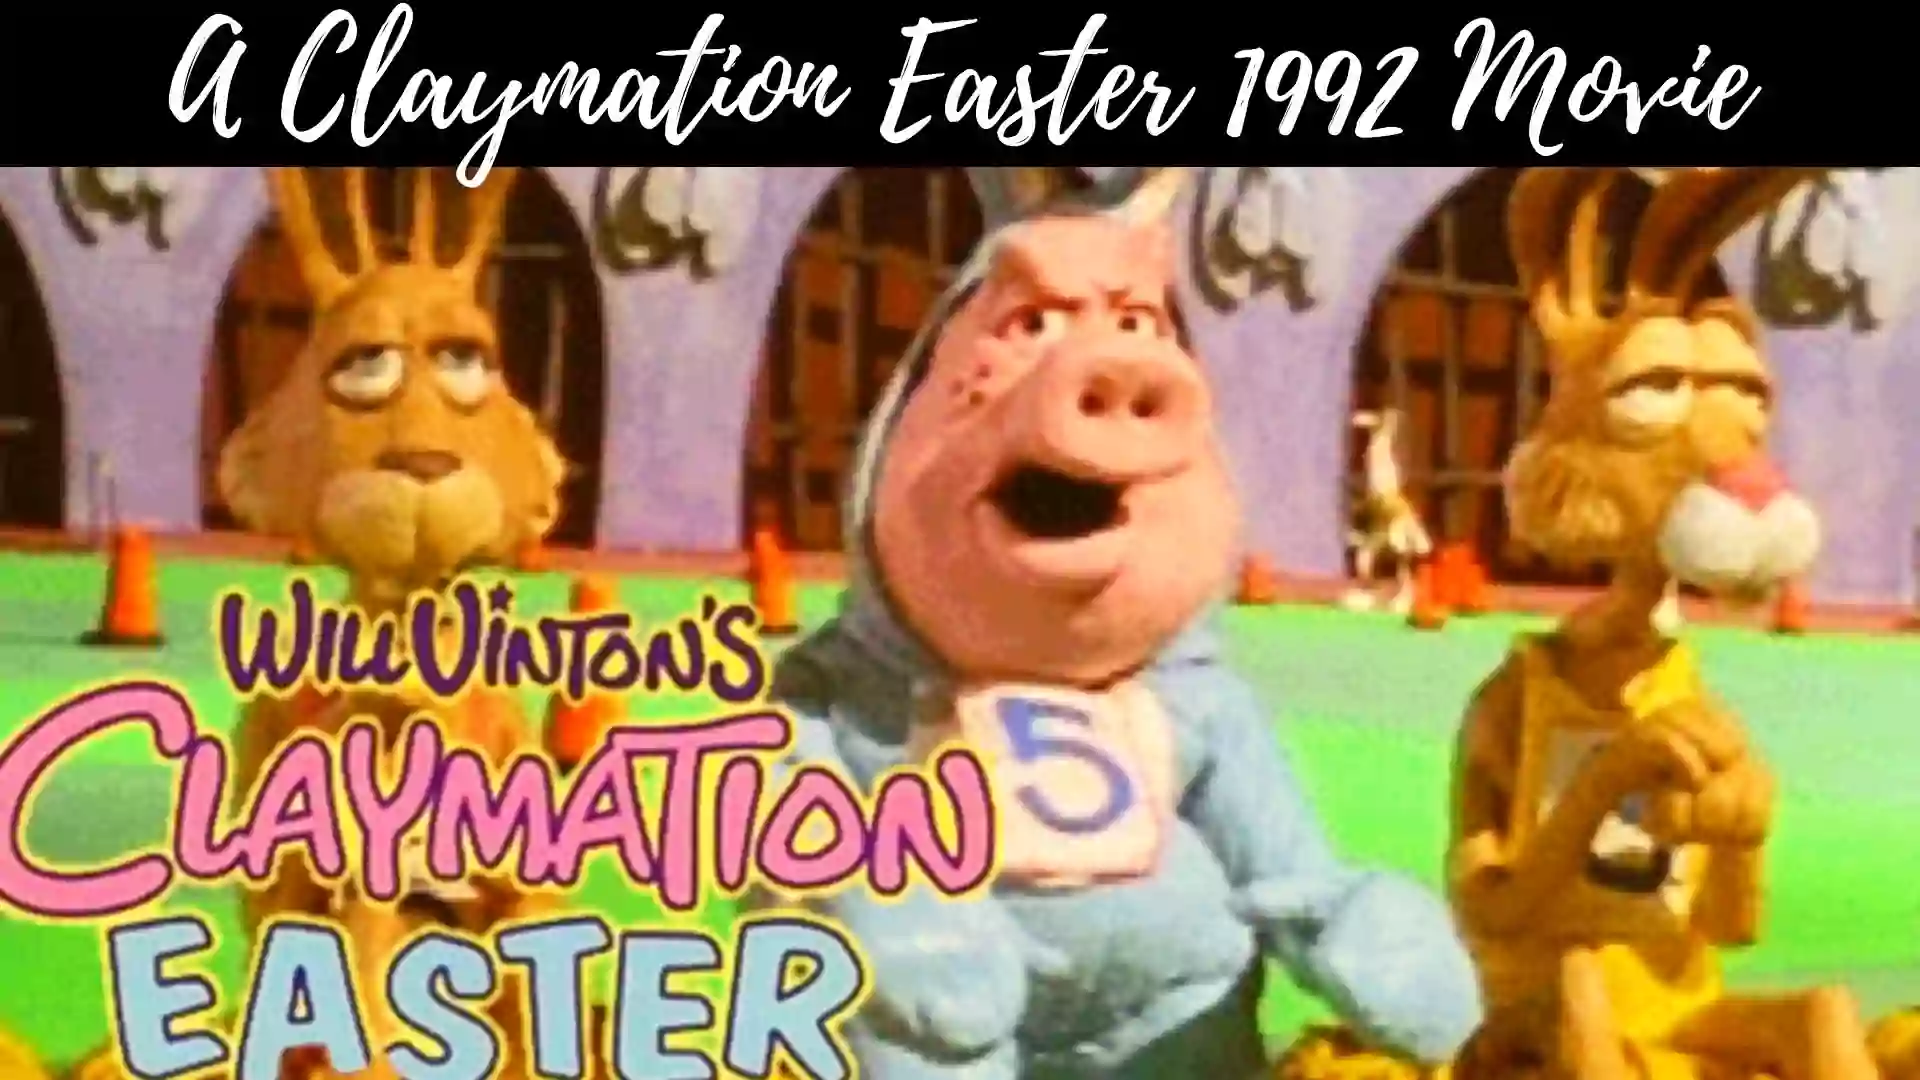 A Claymation Easter Movie | A Claymation Easter 1992